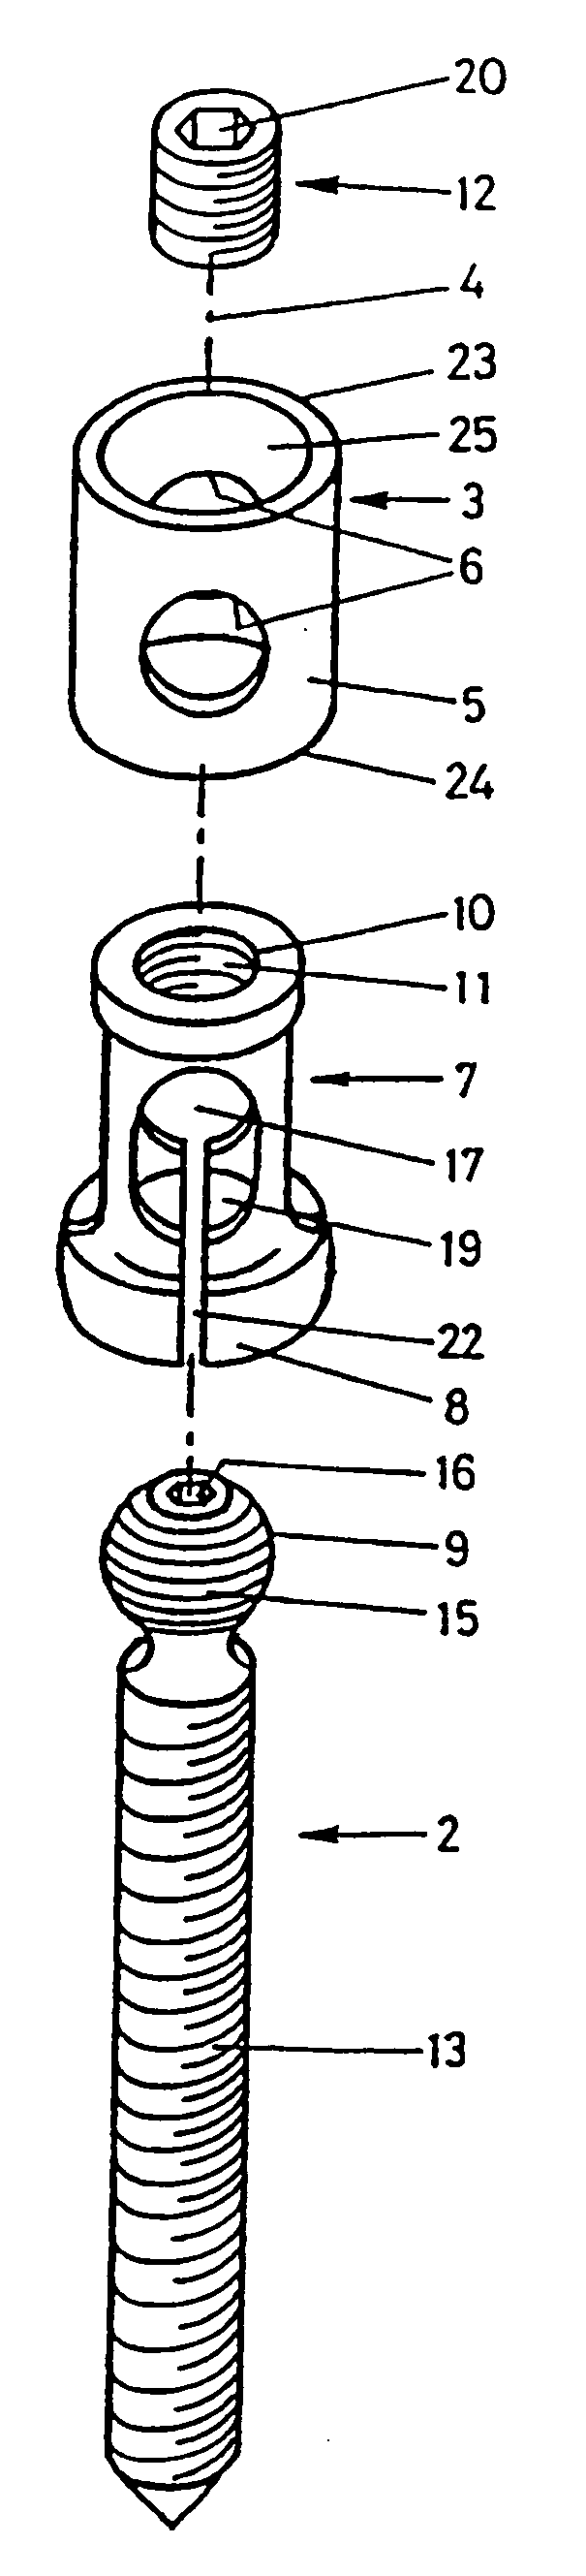 Device for connecting a longitudinal bar to a pedicle screw